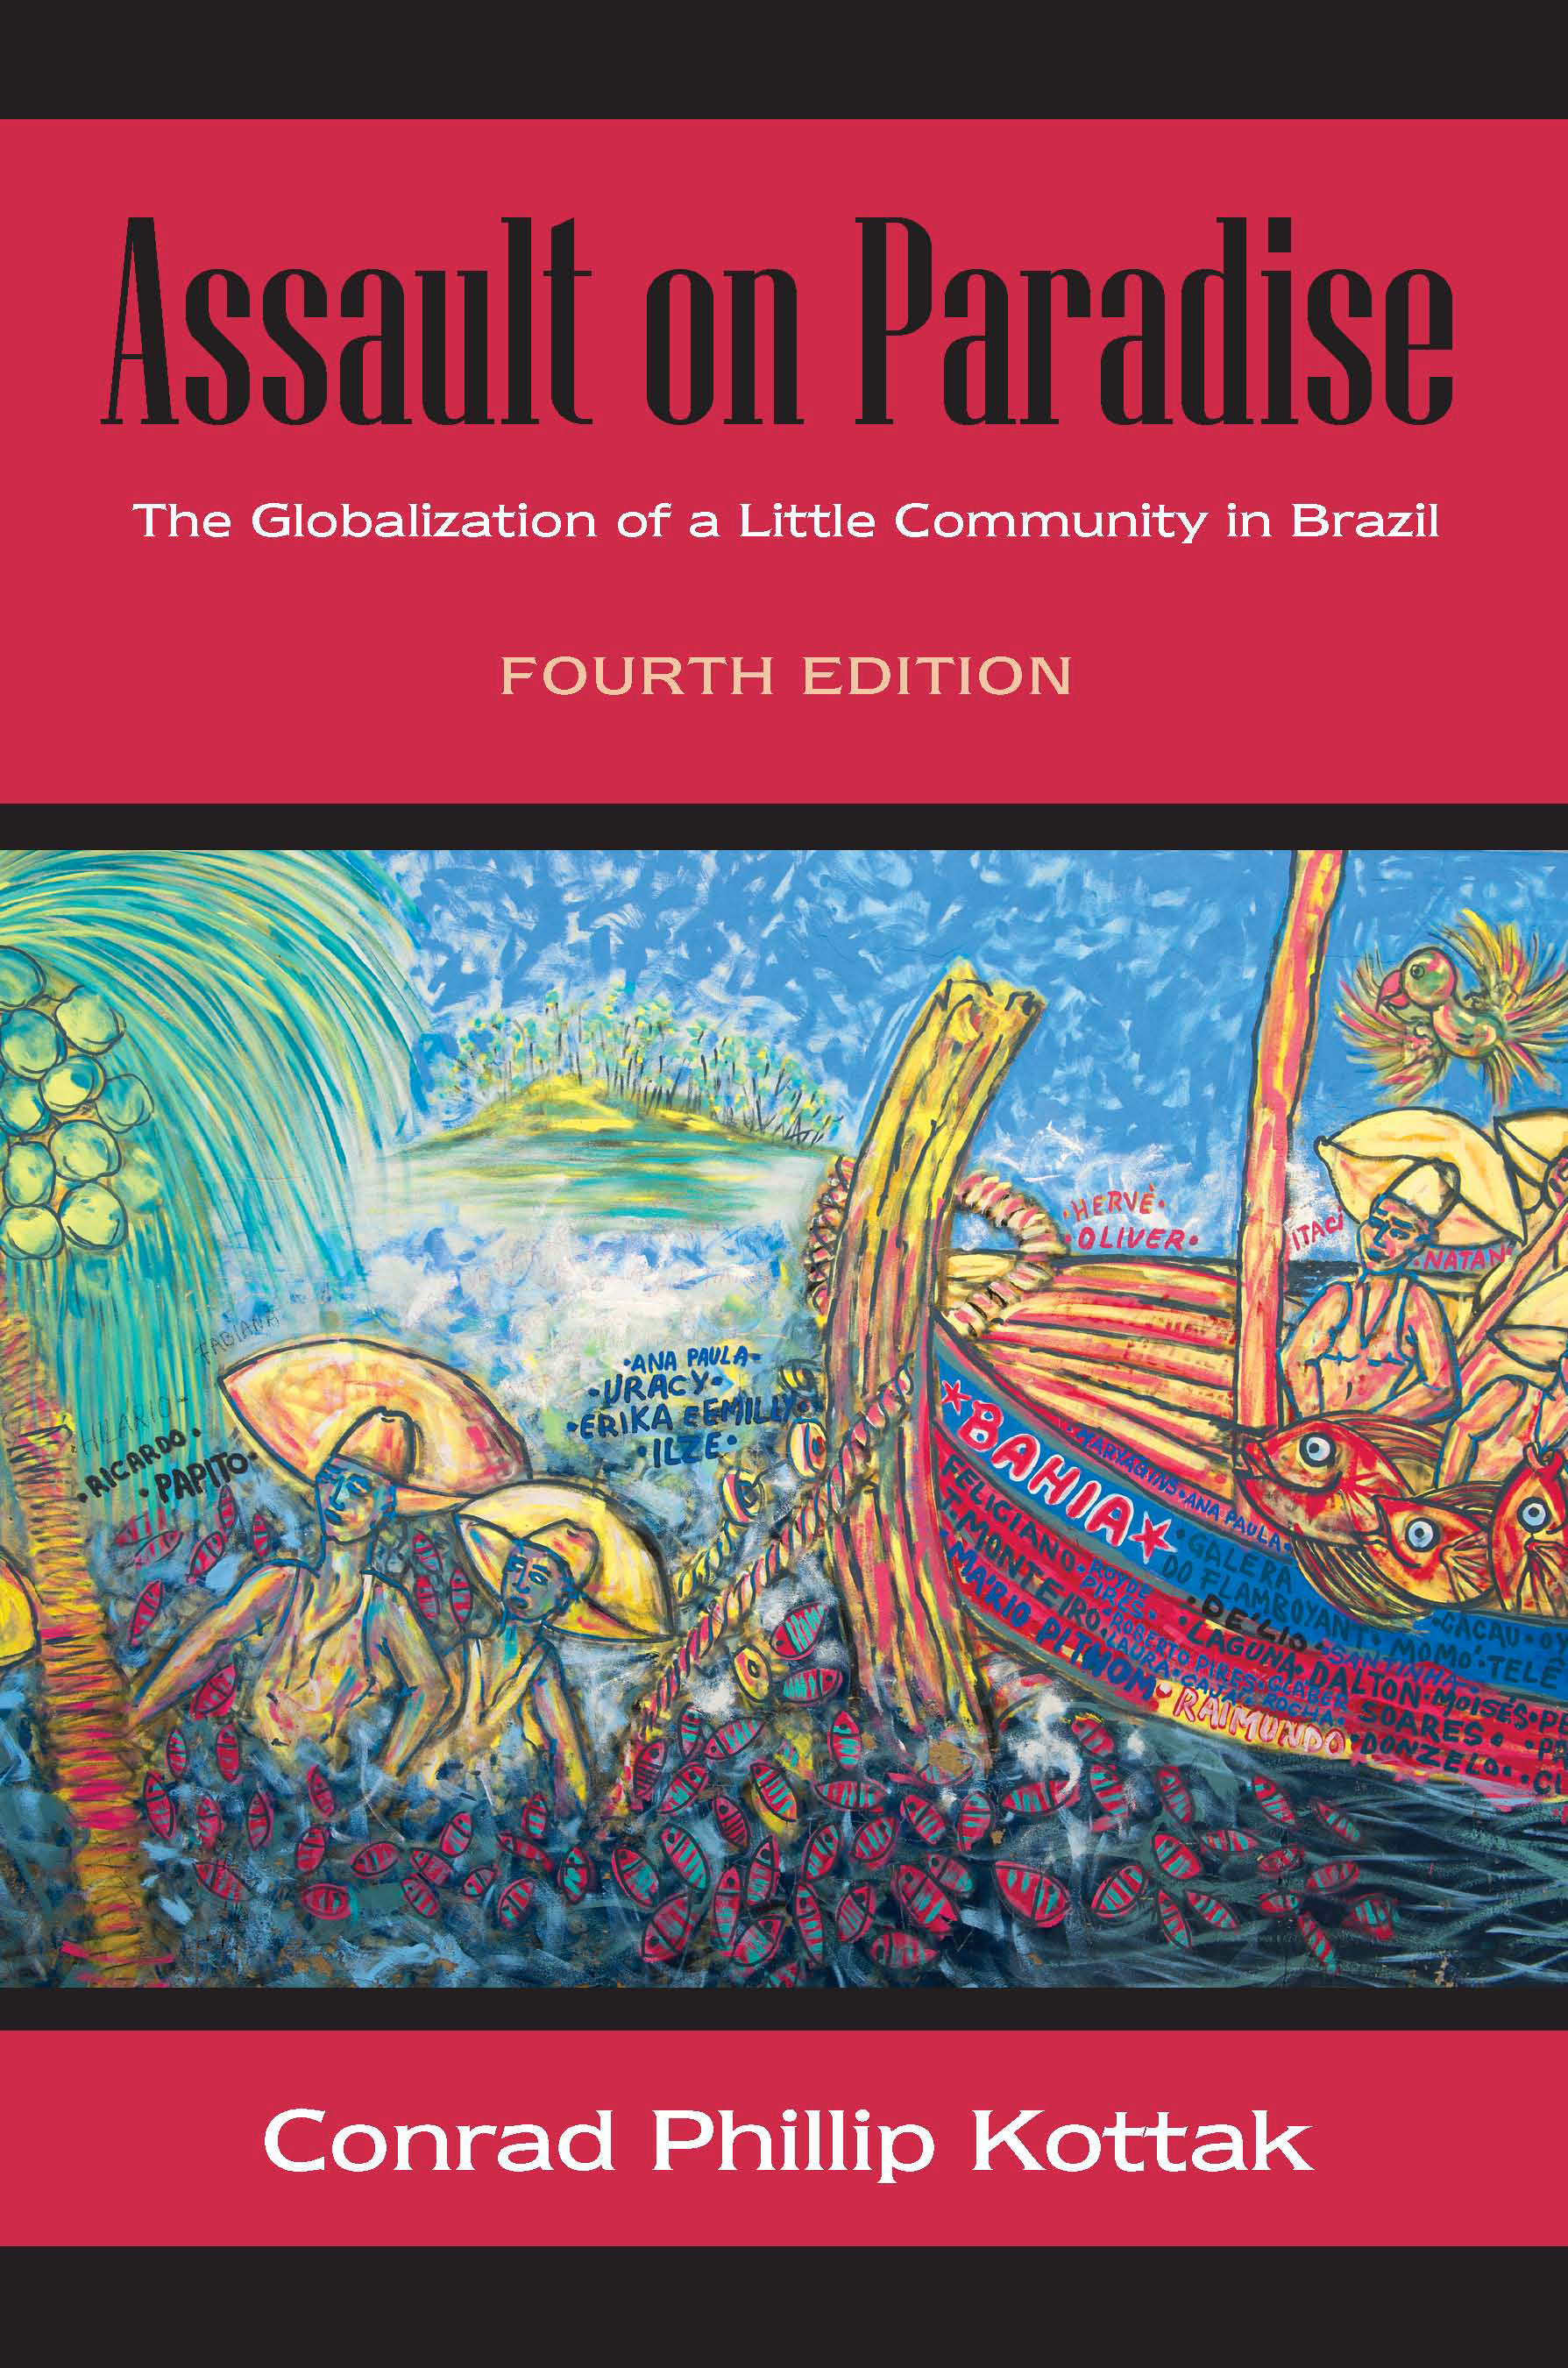 Assault on Paradise: The Globalization of a Little Community in Brazil by Conrad Phillip Kottak